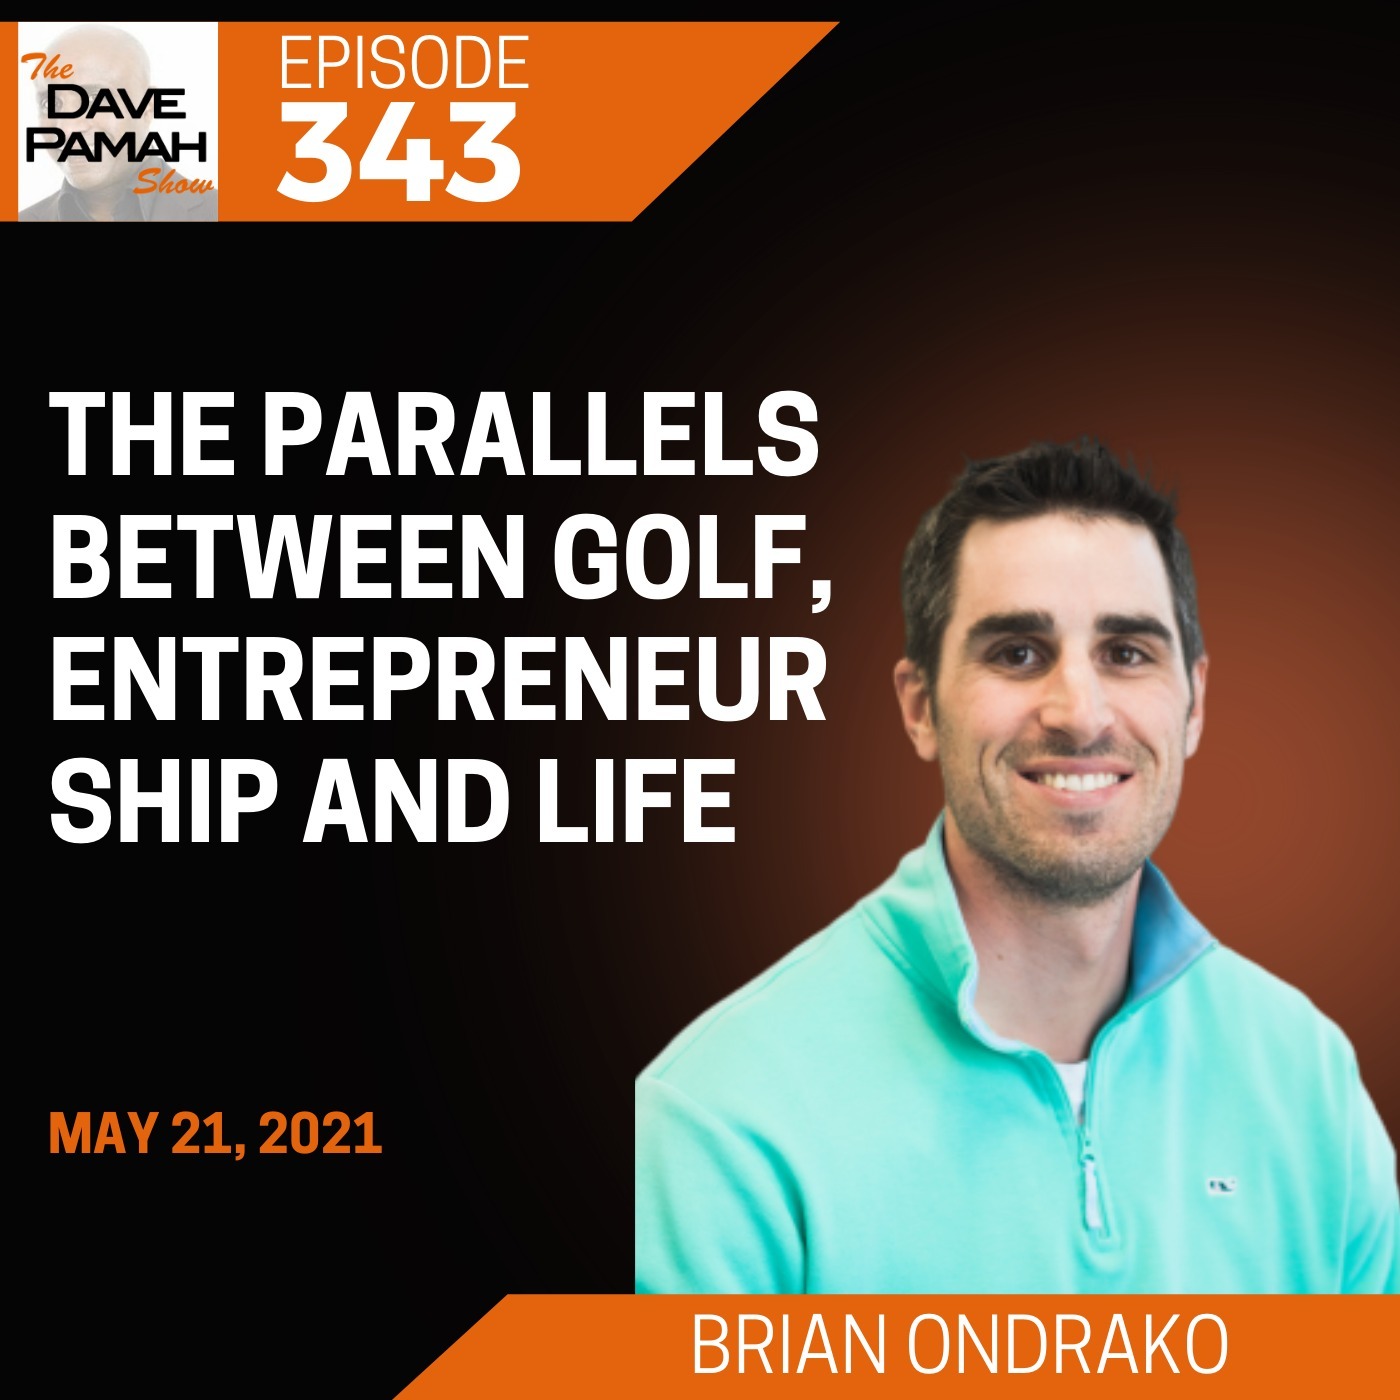 The parallels between golf, entrepreneurship and life with Brian Ondrako Image